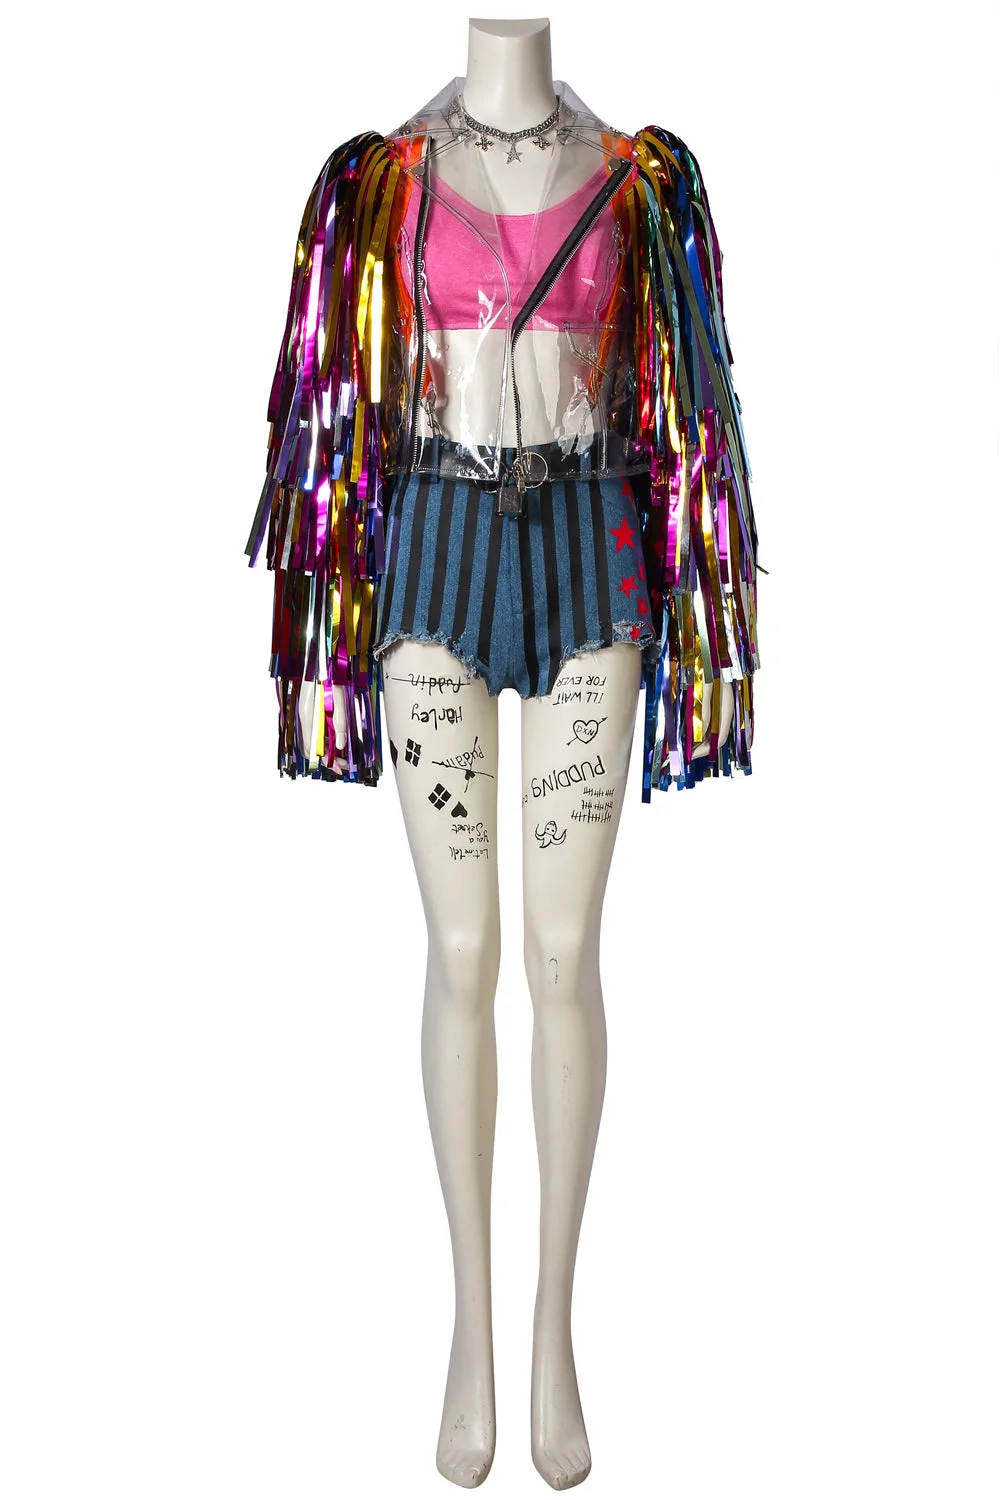 Harley Quinn Costume Birds of Prey Rainbow Cosplay Outfits